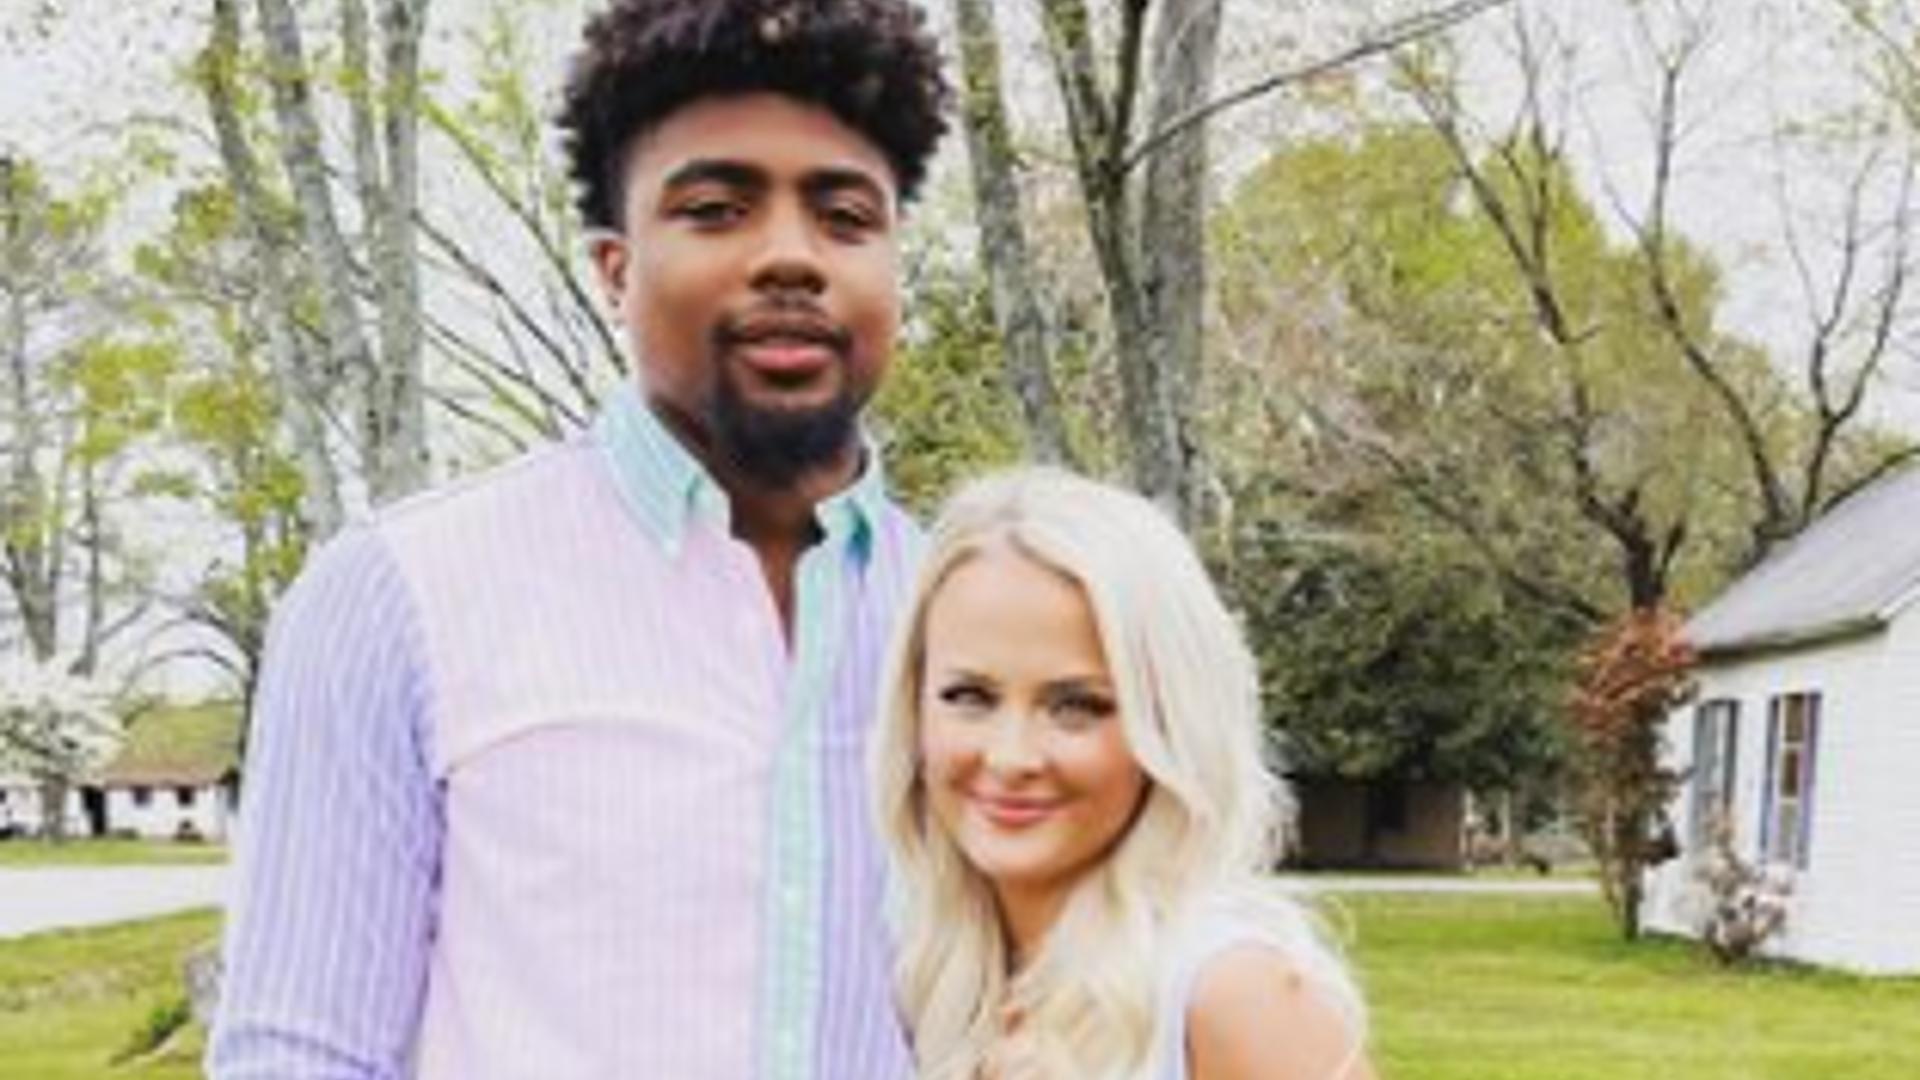 Who is Treylon Burks’s girlfriend? Know all about Shelby Pearlman